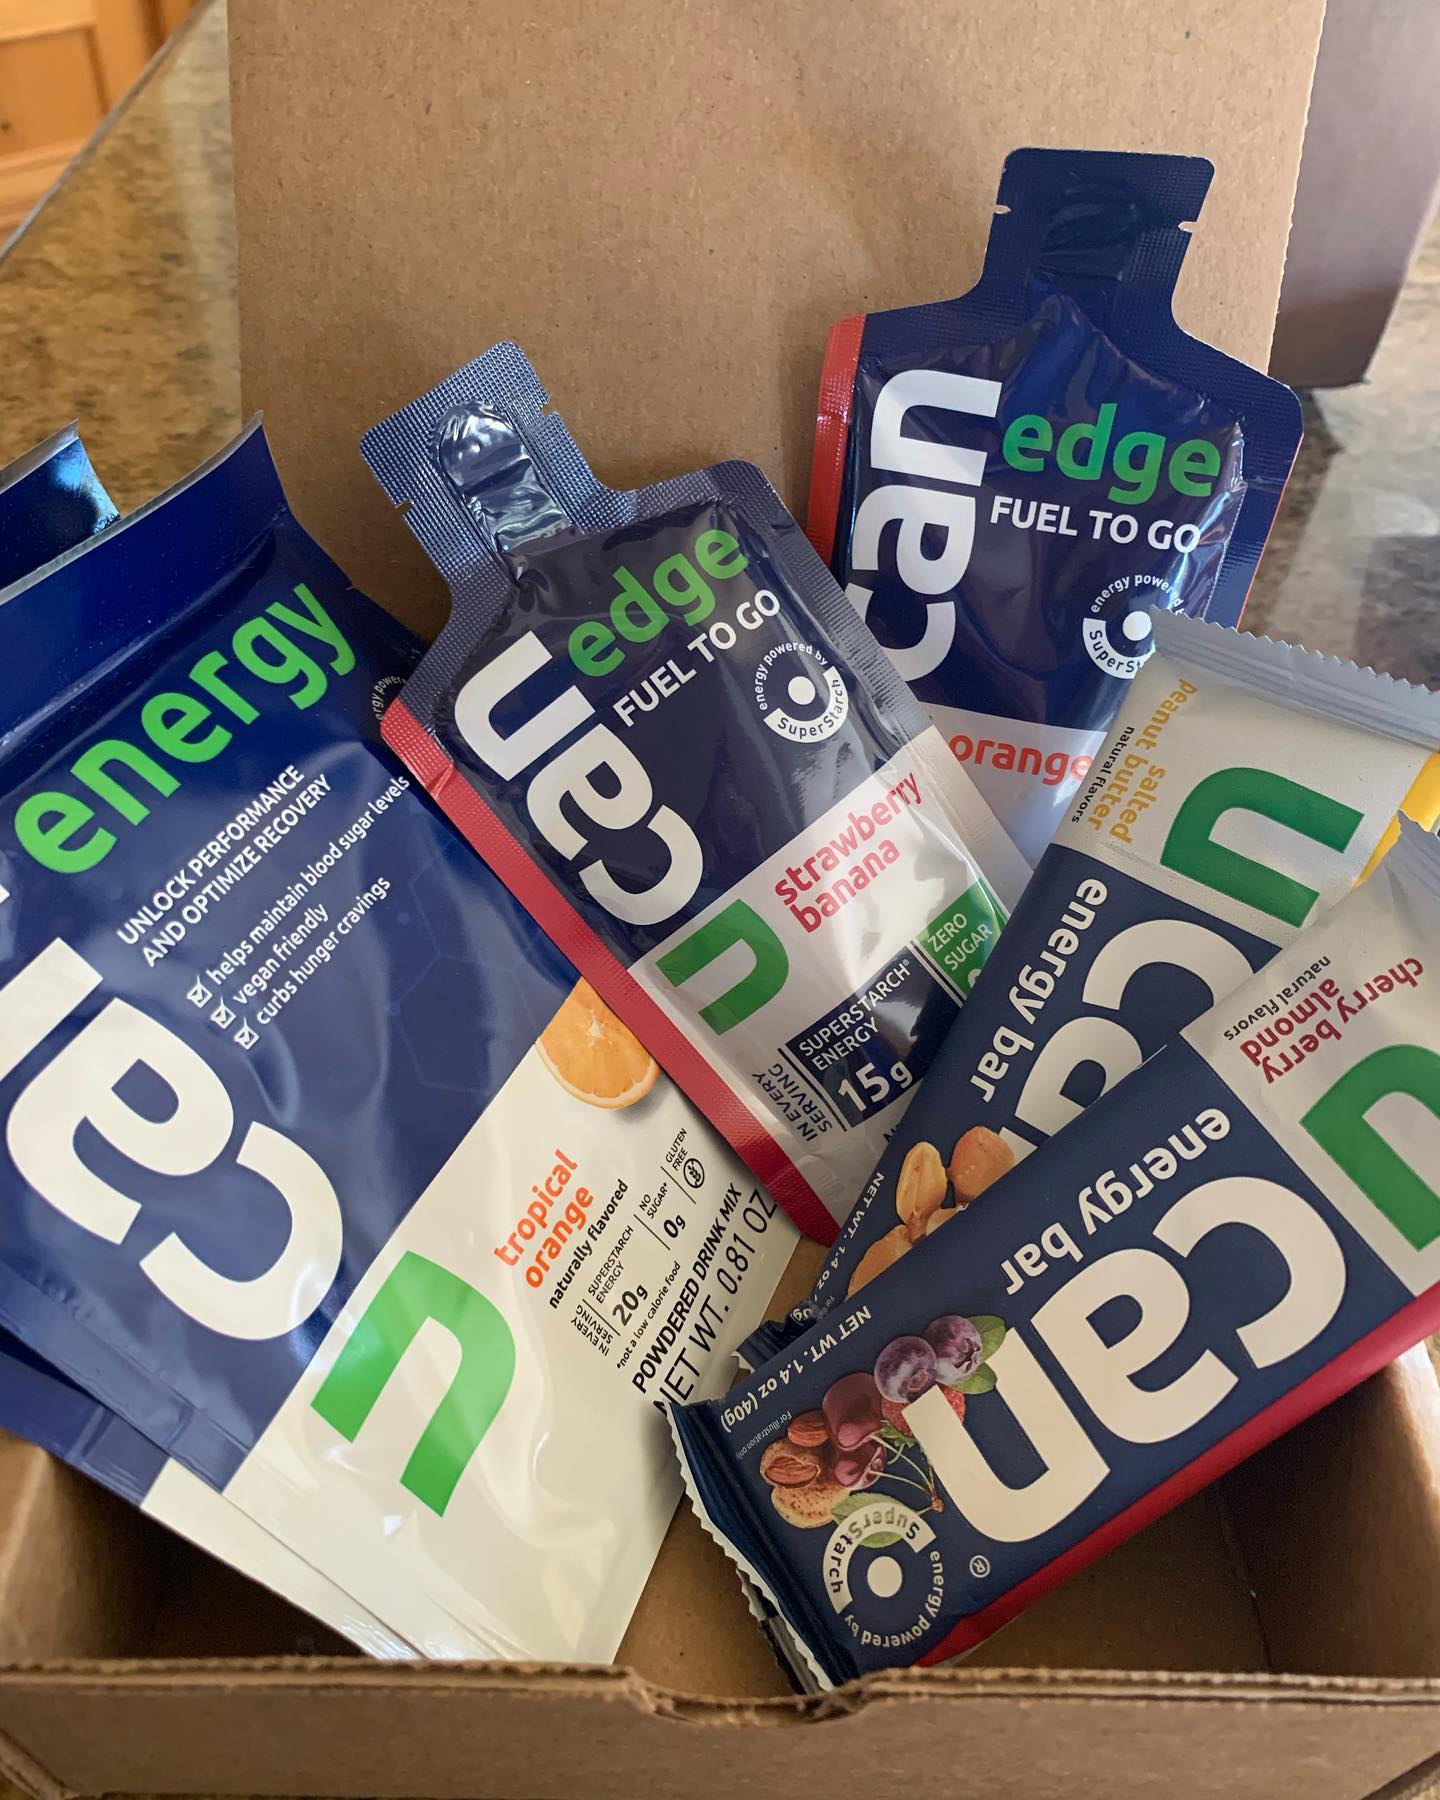 Thanks #genucan ! Global Running Day treats have arrived just in time to give them a try this weekend! 👏🏻🙌🏻 #runner #fuelyourbody #recovery